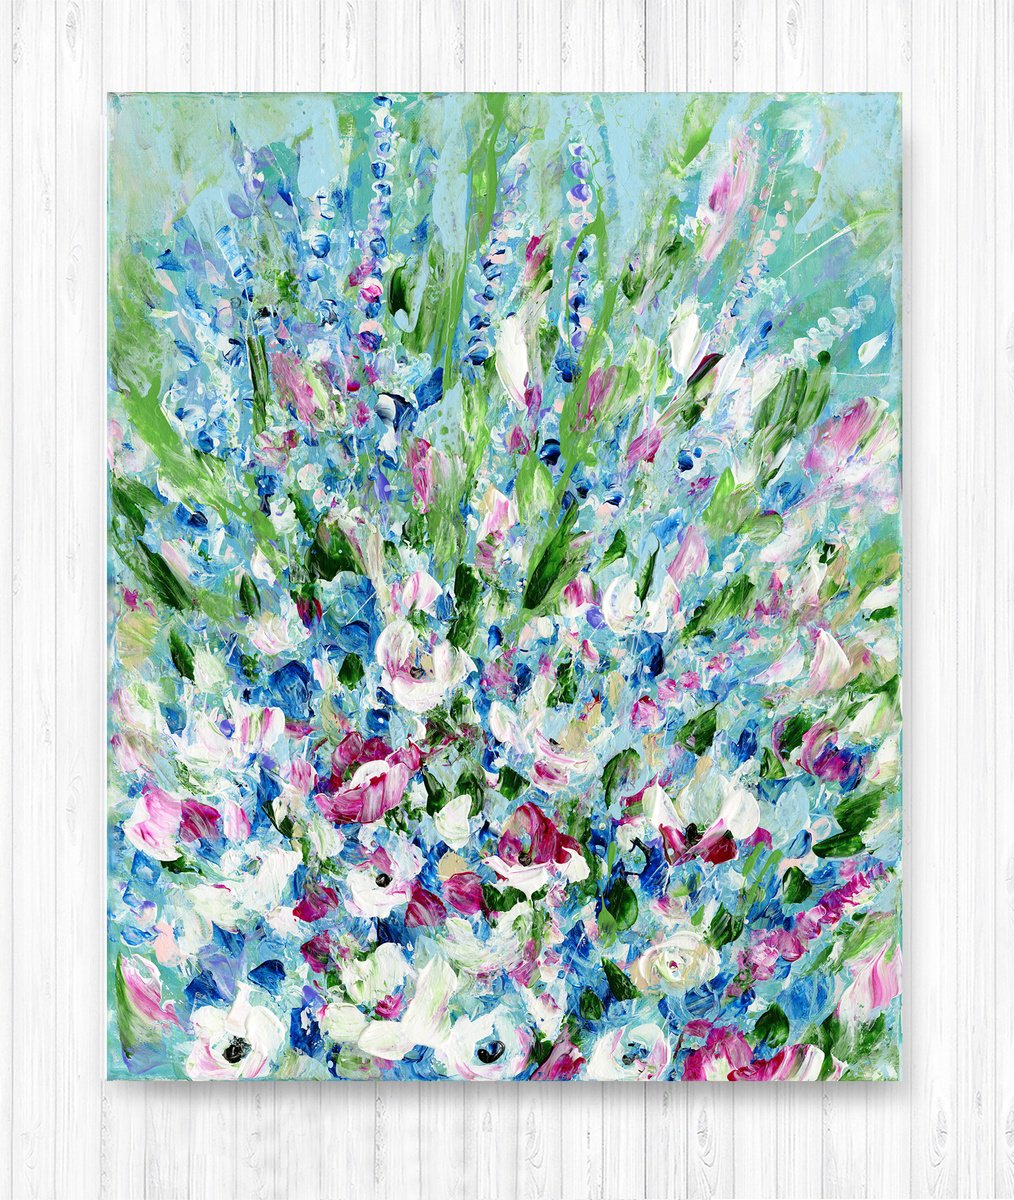 Lost Among The Booms 1 - Floral Painting by Kathy Morton Stanion by Kathy Morton Stanion